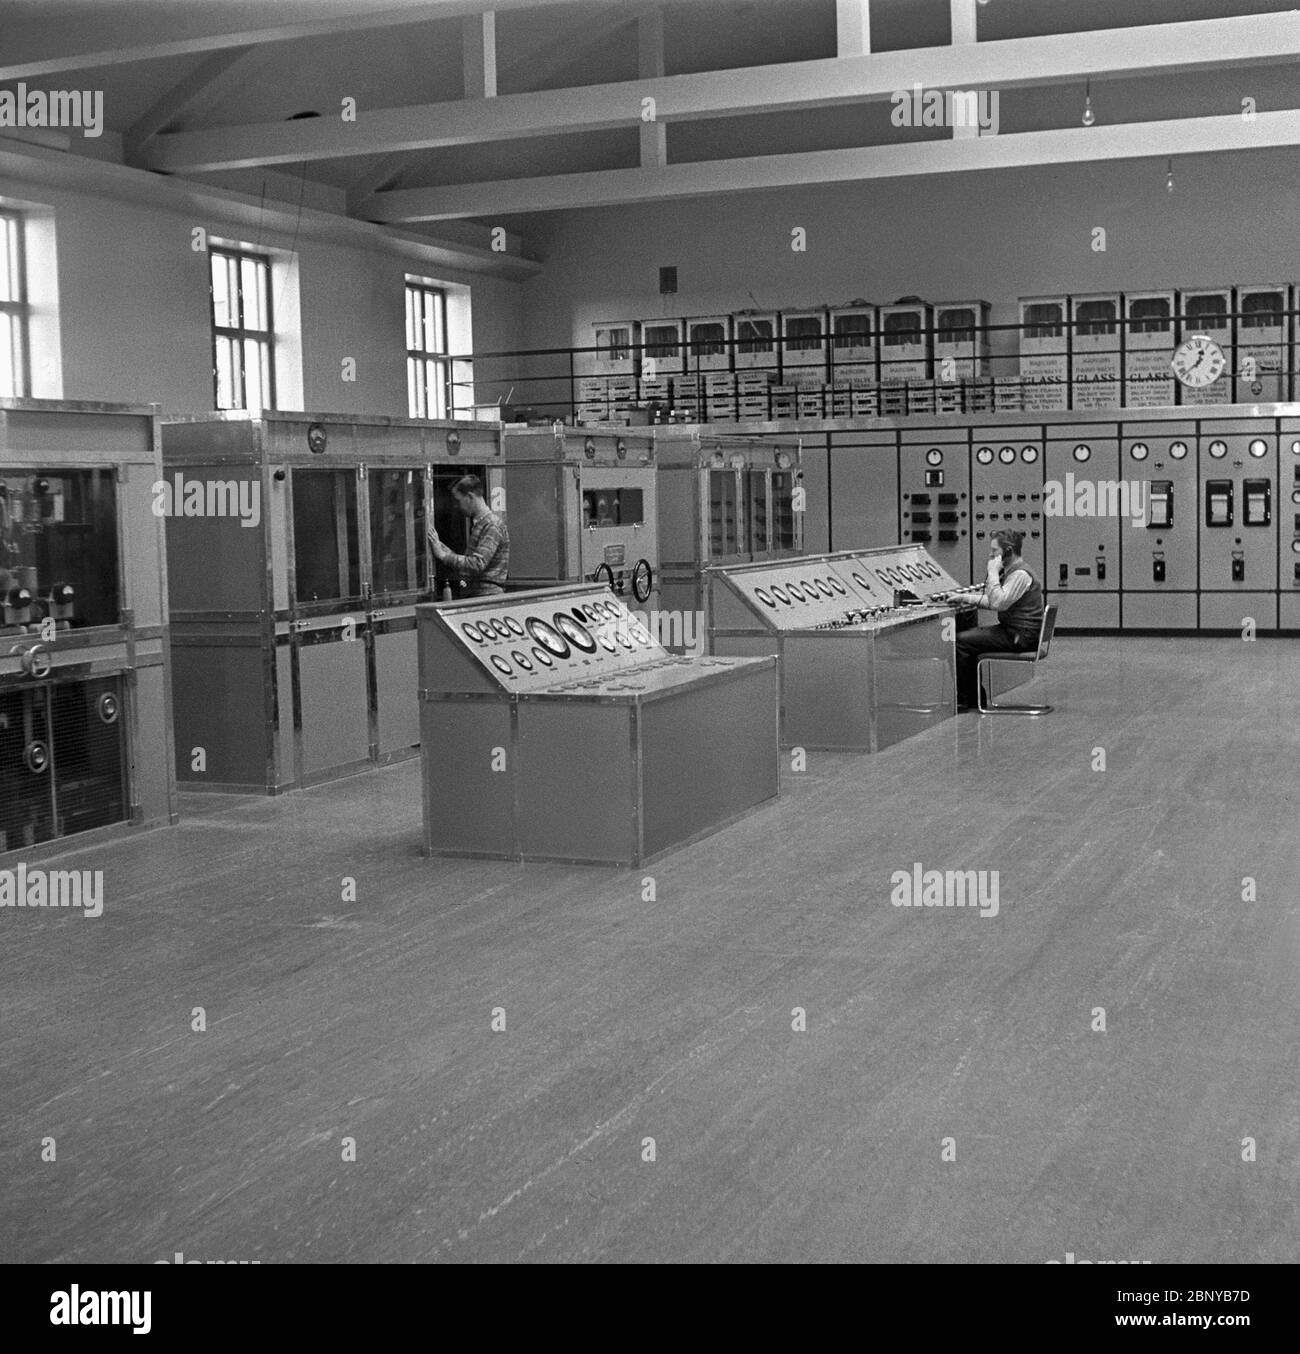 Yle's radio transmission unit in Lahti radio station, 1930's. View of  transmitter hall showing units with water cooled tubes and control desk of  150 0211 Stock Photo - Alamy